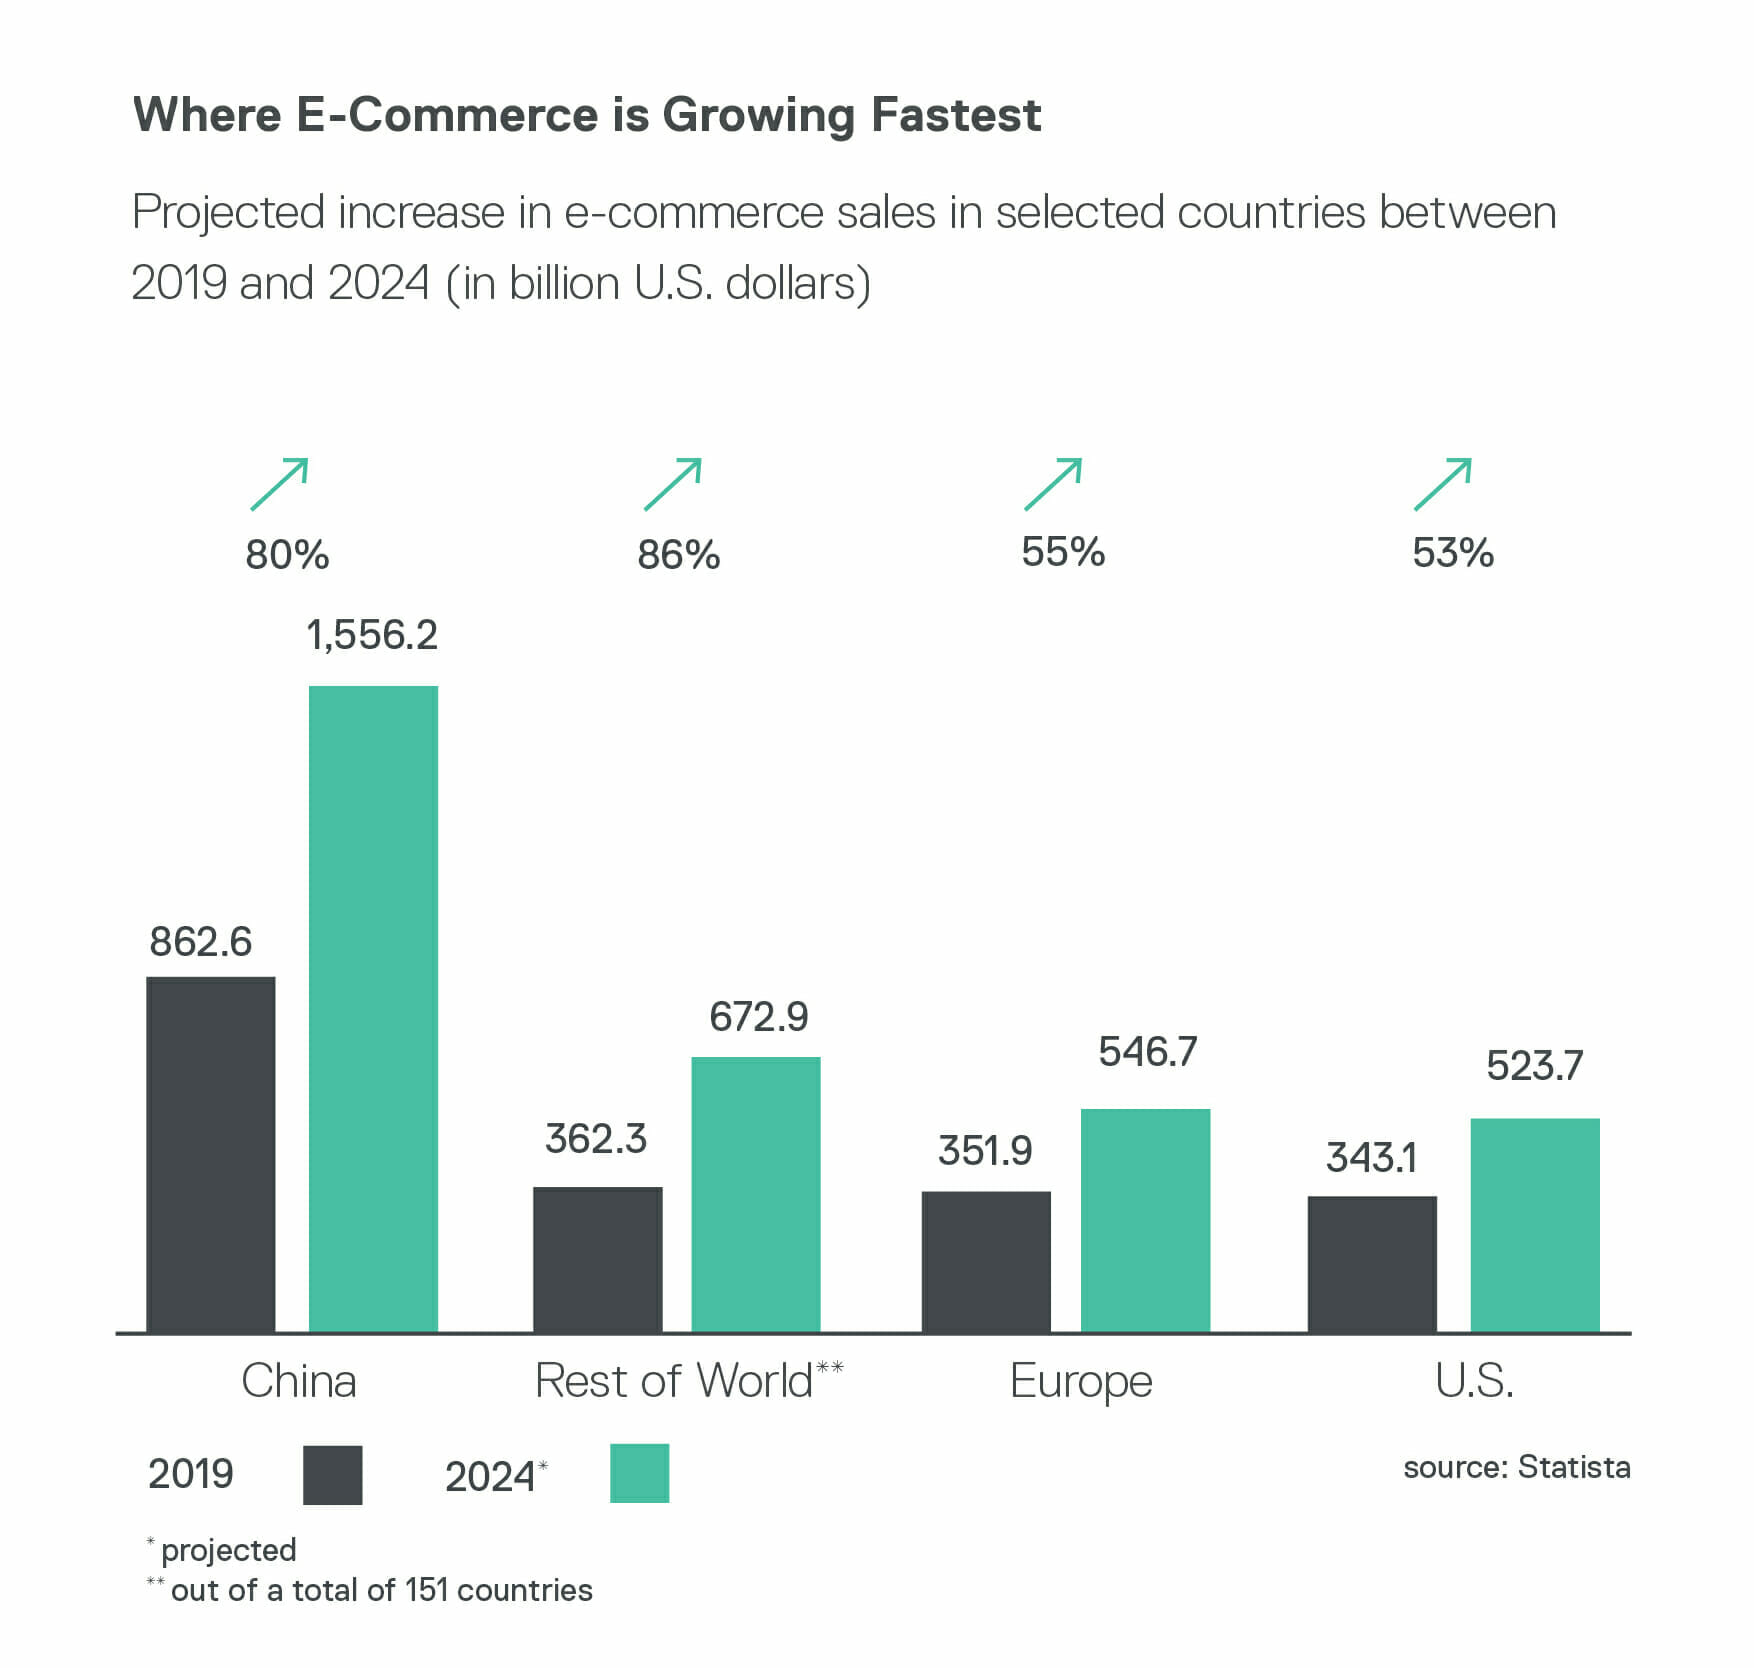 Bar chart comparing projected digital commerce sales increases from 2019 to 2024, showing 80% growth in China, 86% in the Rest of World, 56% in Europe, and 53% in the U.S., with respective sales figures.